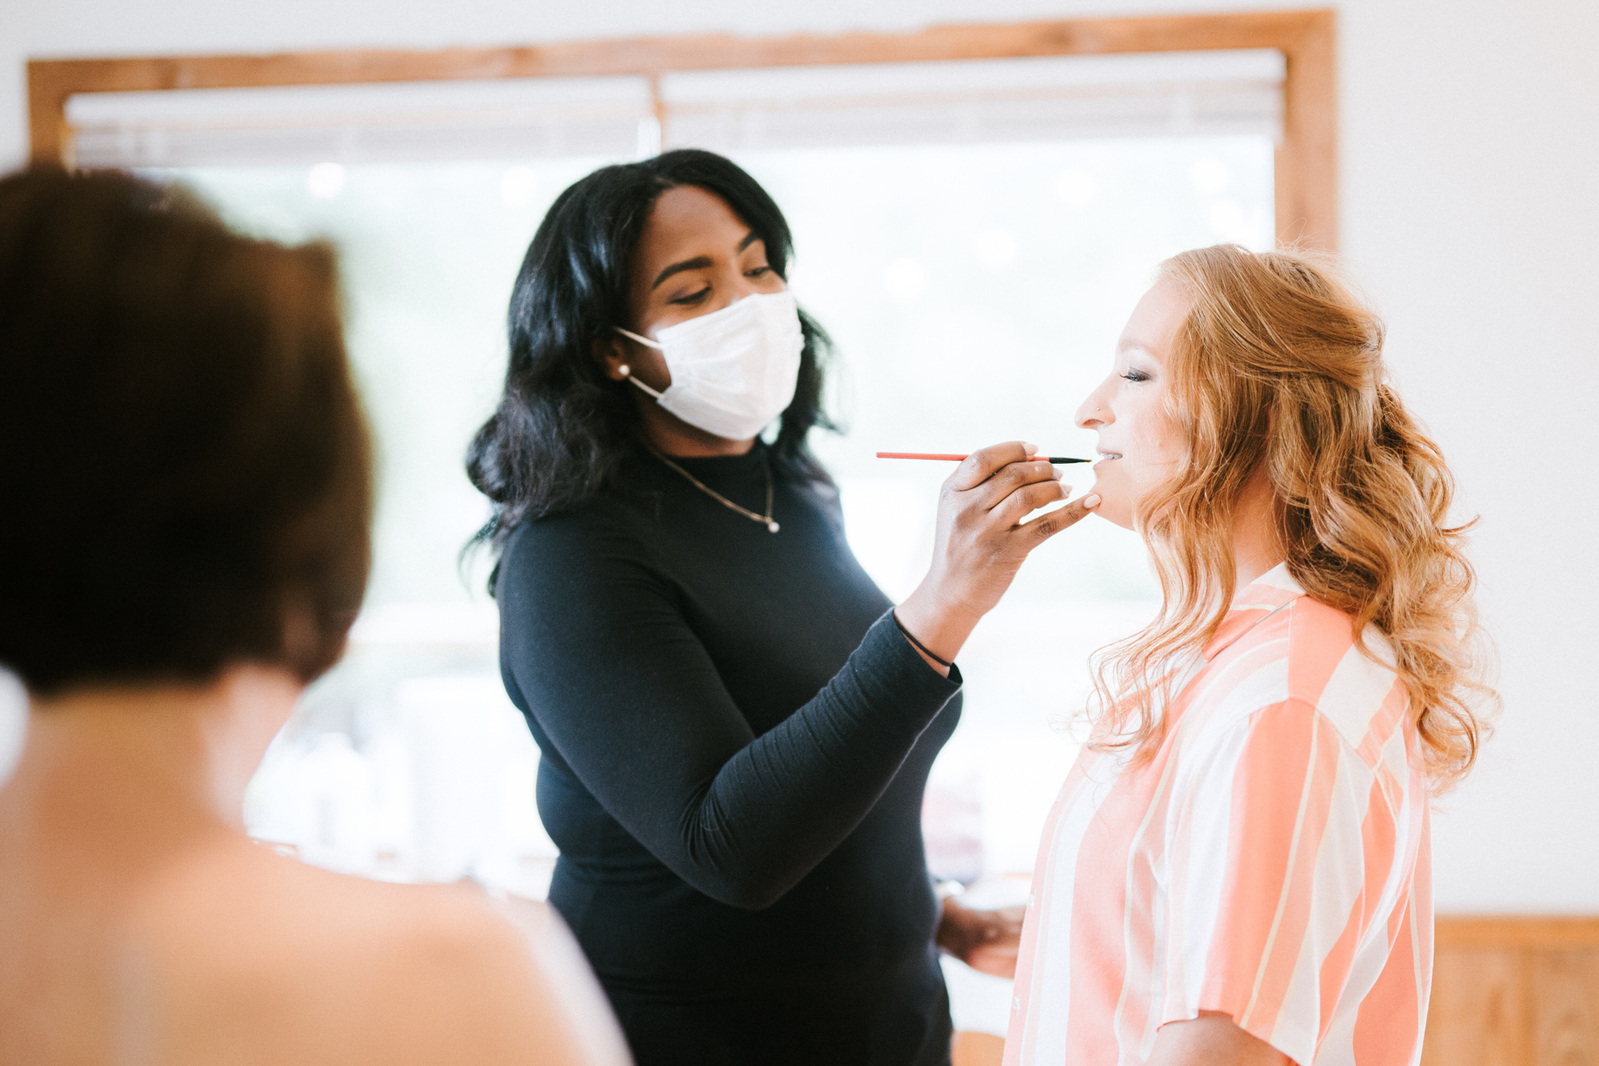 RALEIGH MAKEUP ARTIST HAIR STYLIST BEST INTERNATIONAL GLOBAL PUBLISHED FIVE STAR BRIDAL BTS BEHIND THE SCENES TRAVEL EXCLUSIVE PRIVATE PERSONAL PROFESSIONAL COMMERCIAL BUSINESS HEADSHOTS FASHION MAKEUP ARTIST 